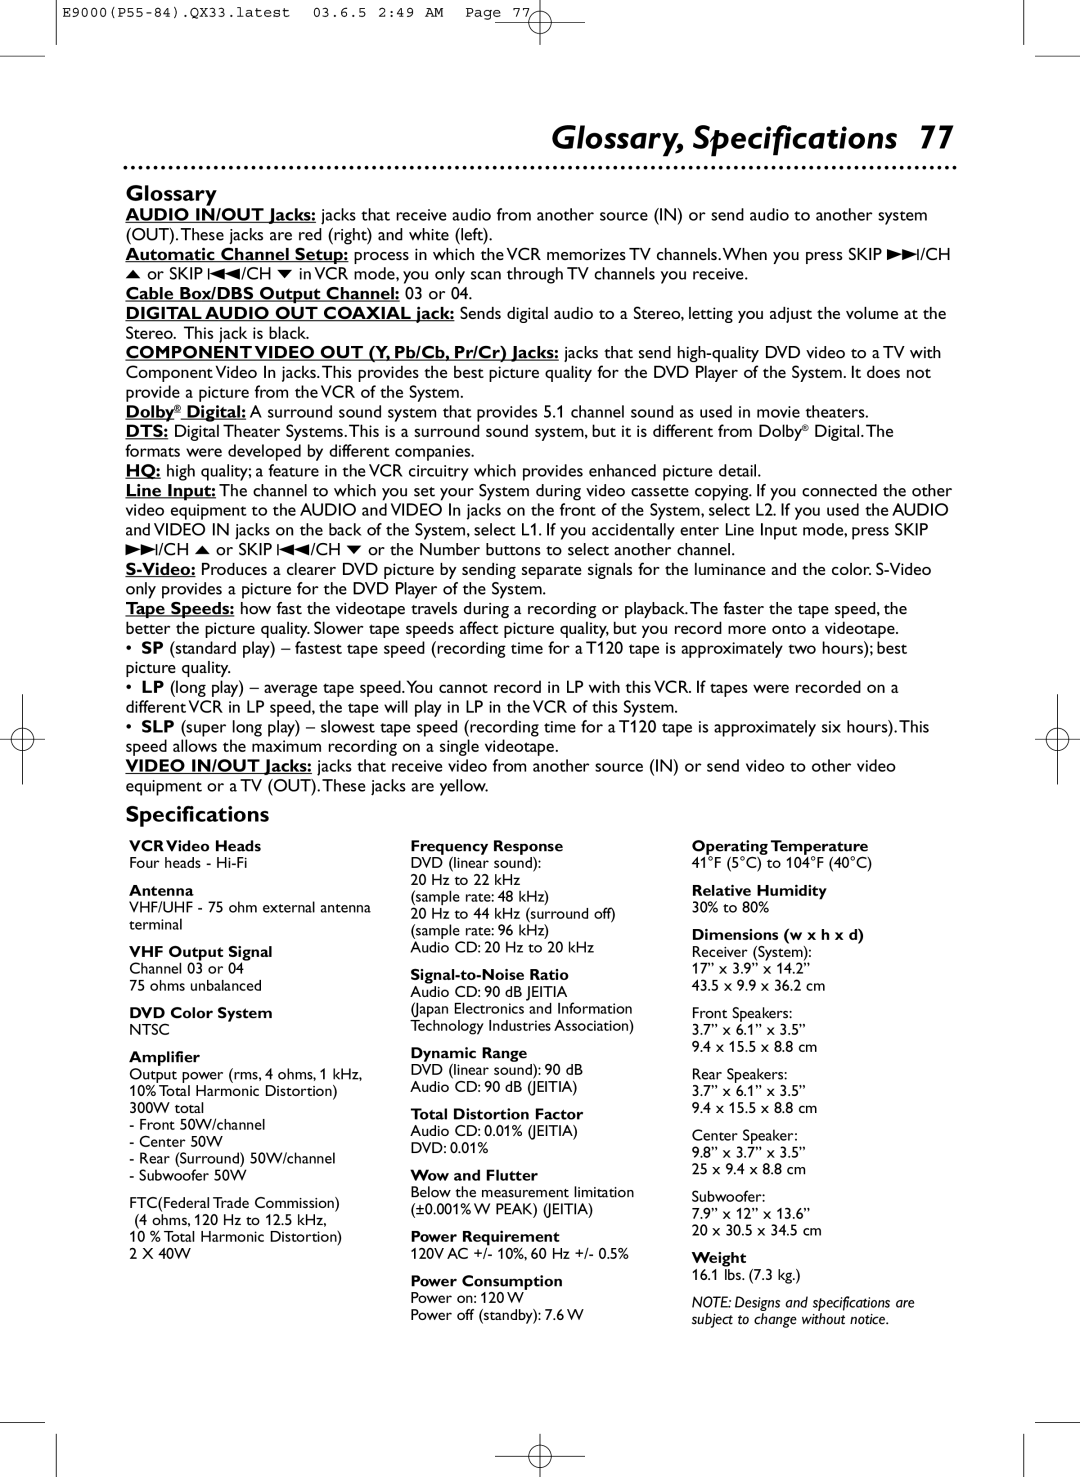 Magnavox MRD500VR owner manual Glossary, Specifications 